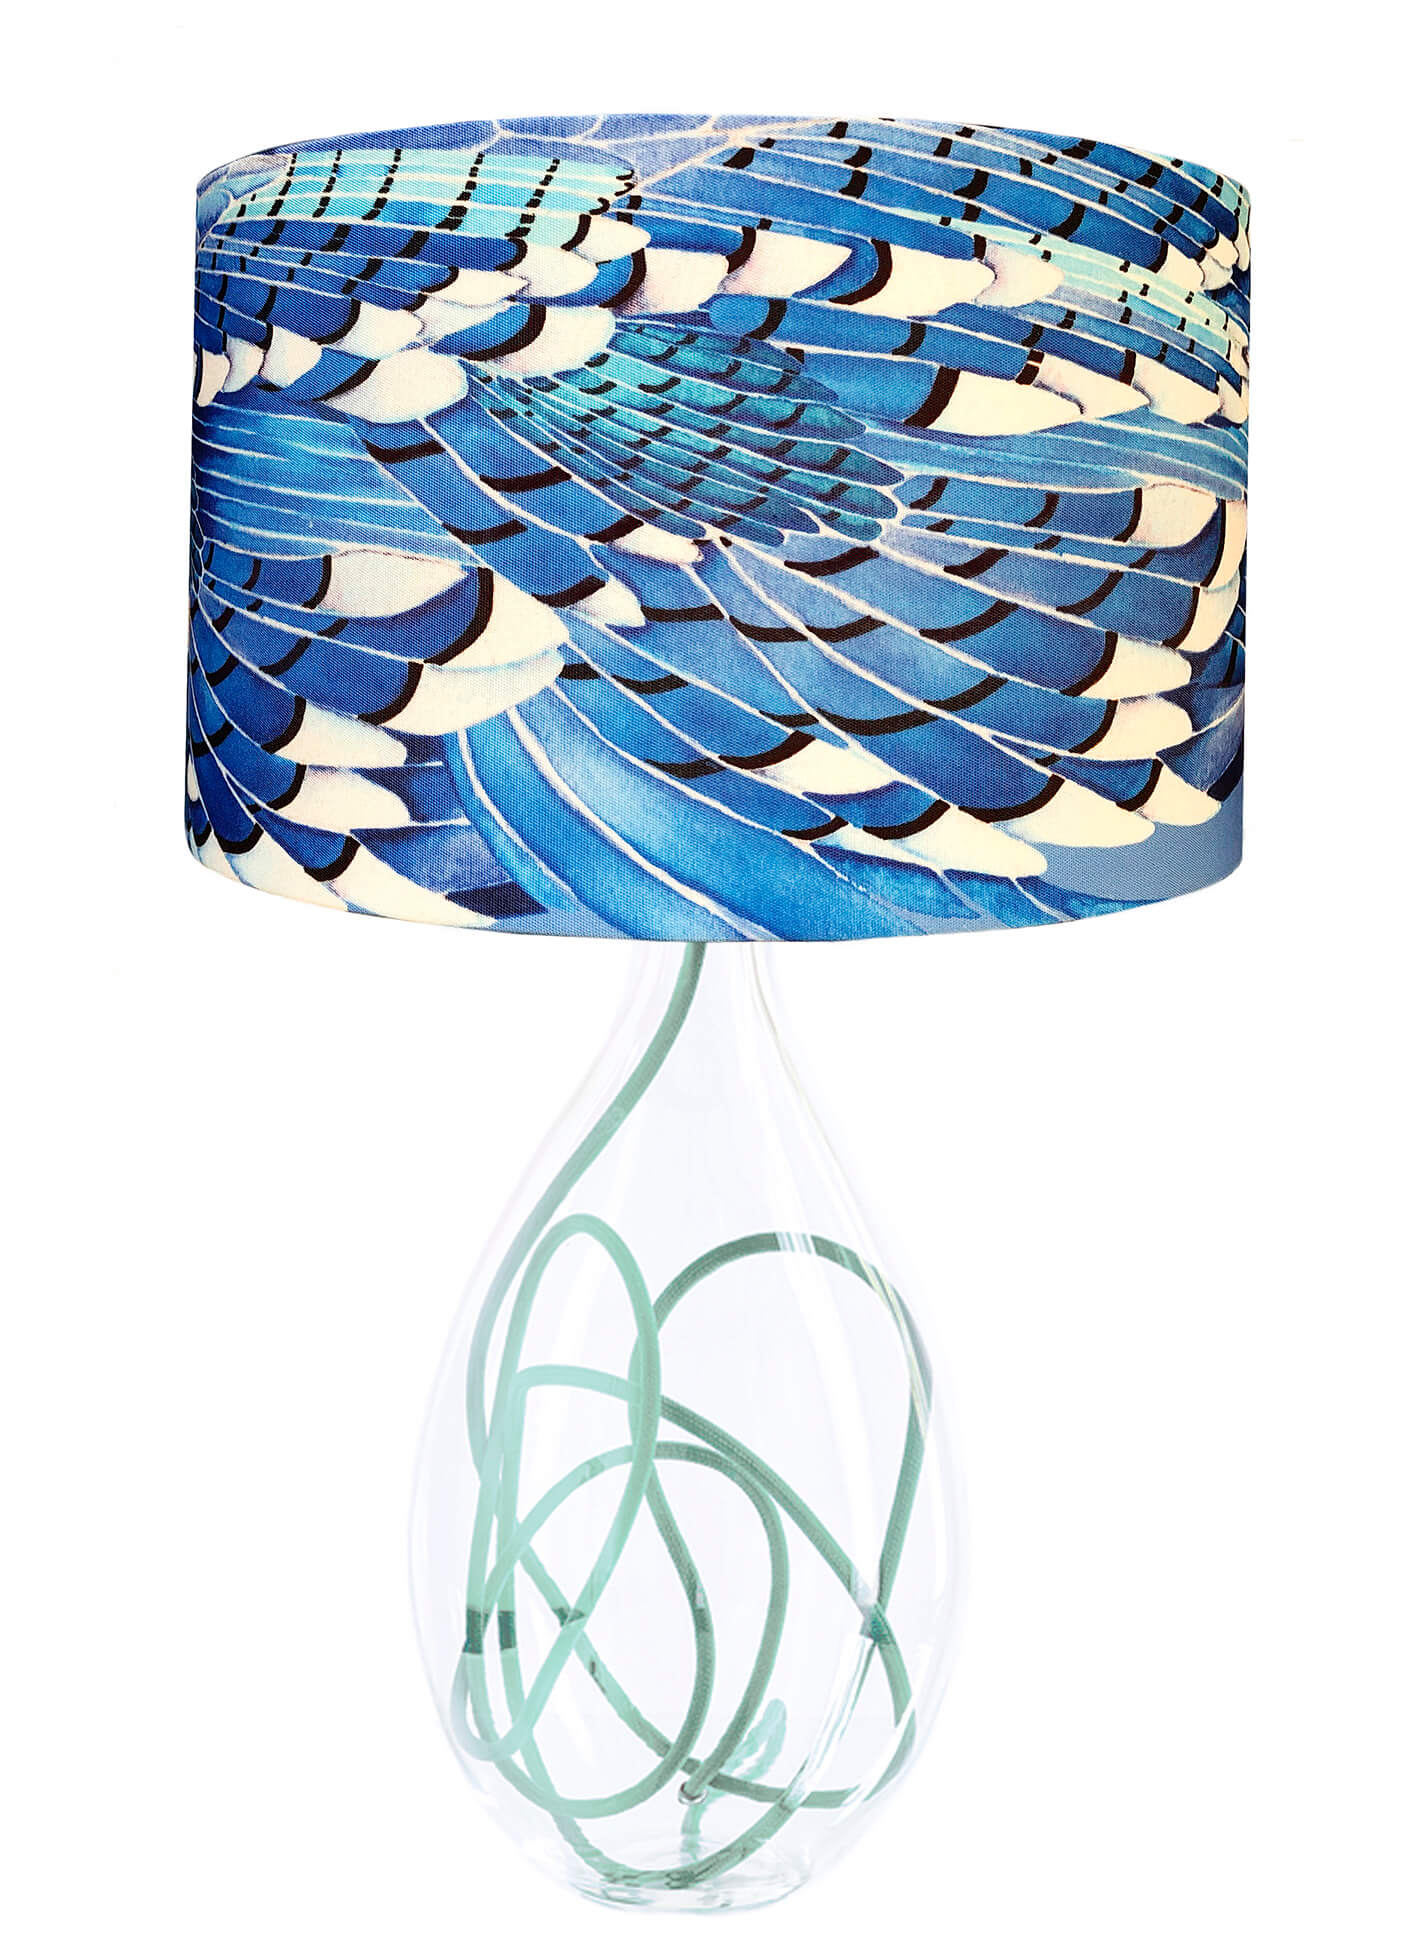 Blue Jay Wing lamp on Royal Blue flex by Anna Jacobs